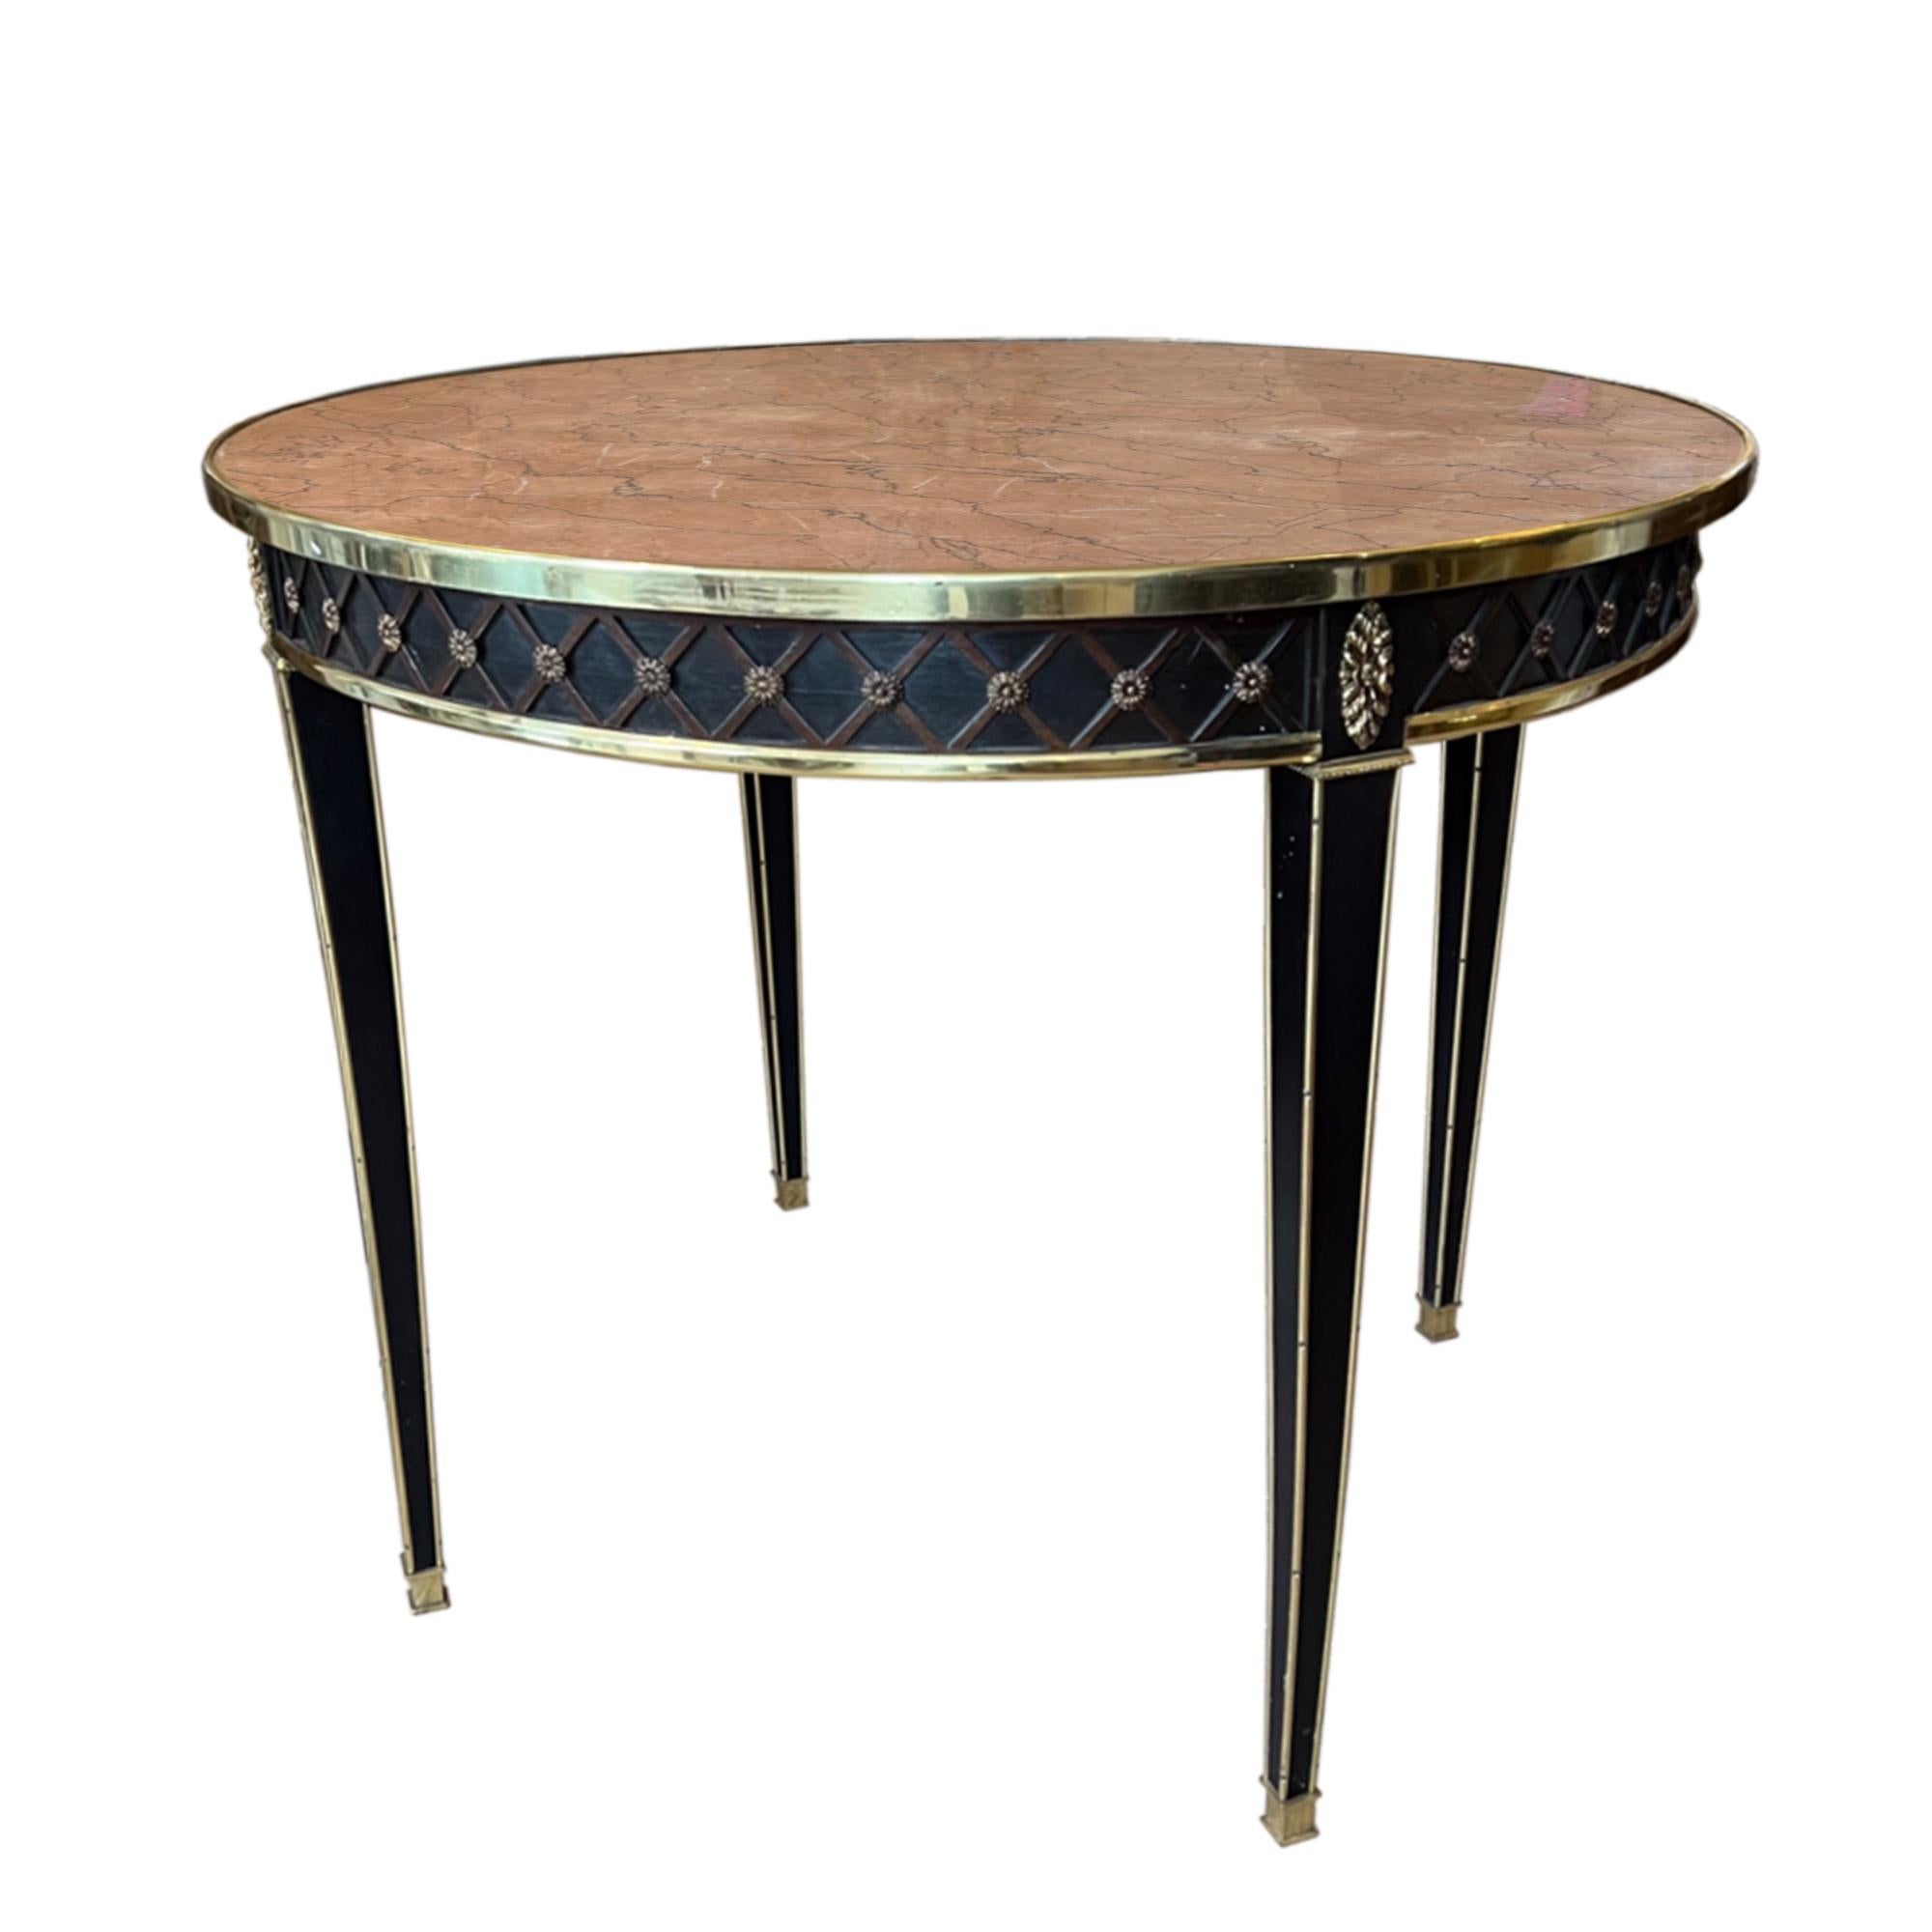 Mid-20th Century French Maison Jansen Style Centre Table With Marble Top